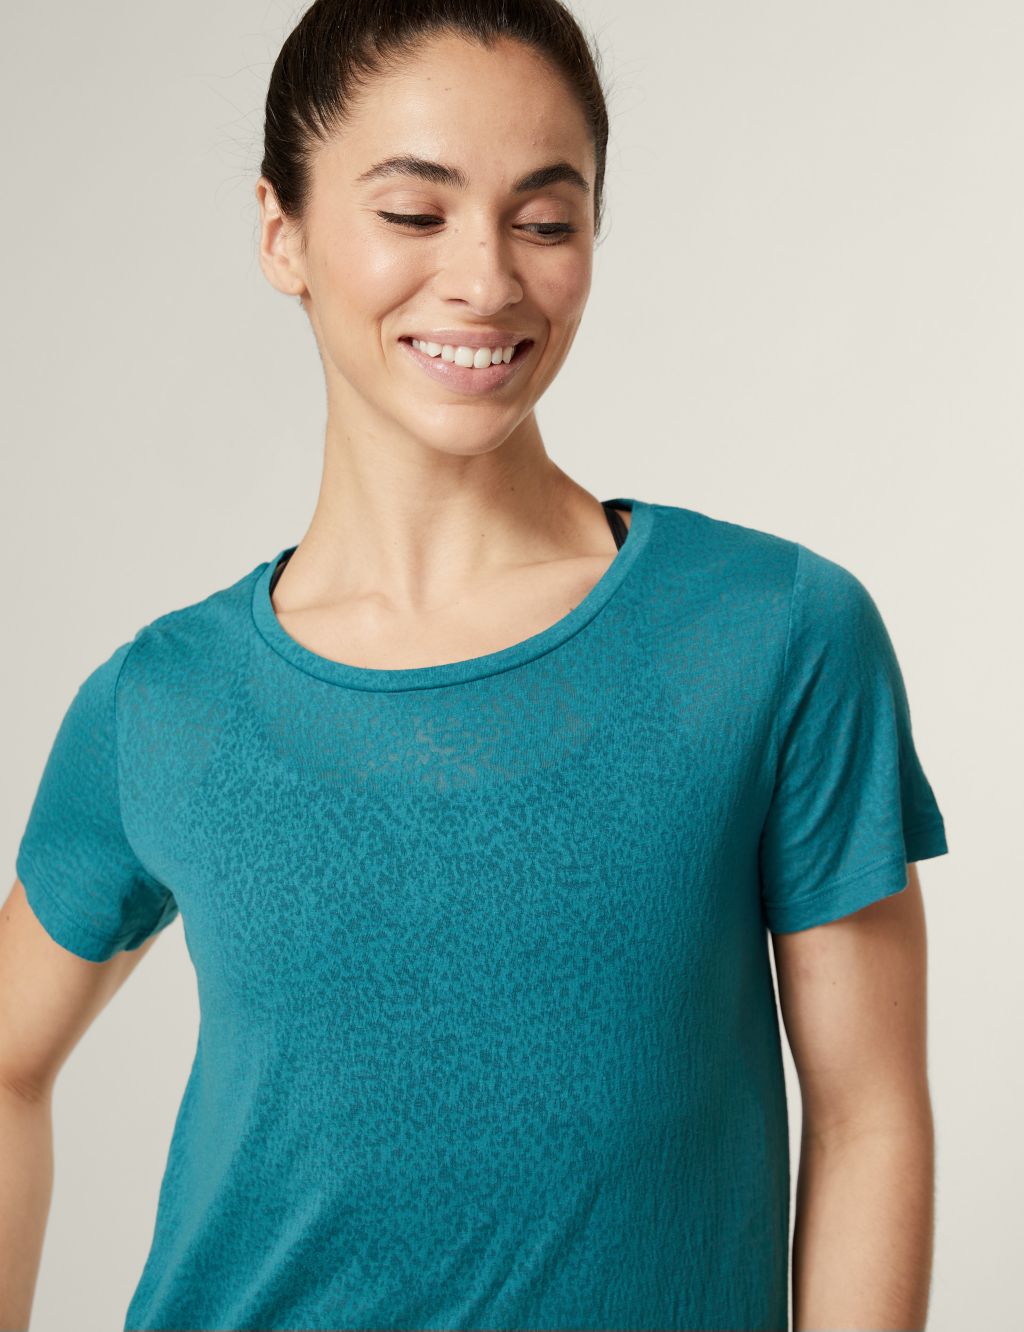 Lightweight Scoop Neck Relaxed T-Shirt image 3